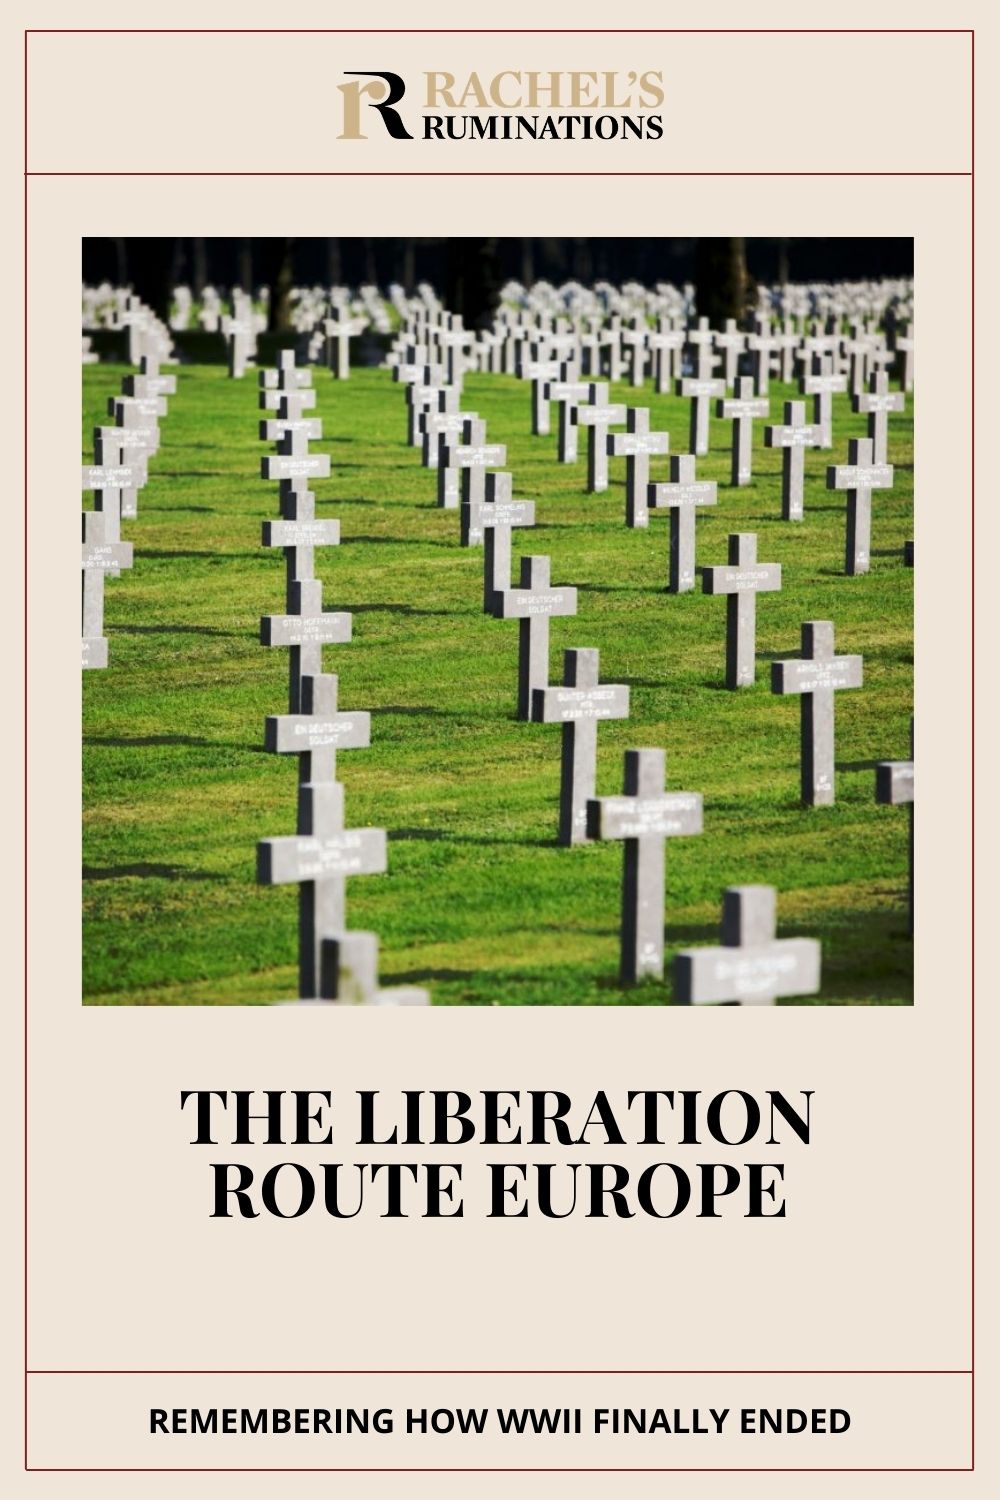 The Liberation Route Europe, its WWII battlefields and museums: it's important to stop and acknowledge the world-changing events of WWII. via @rachelsruminations